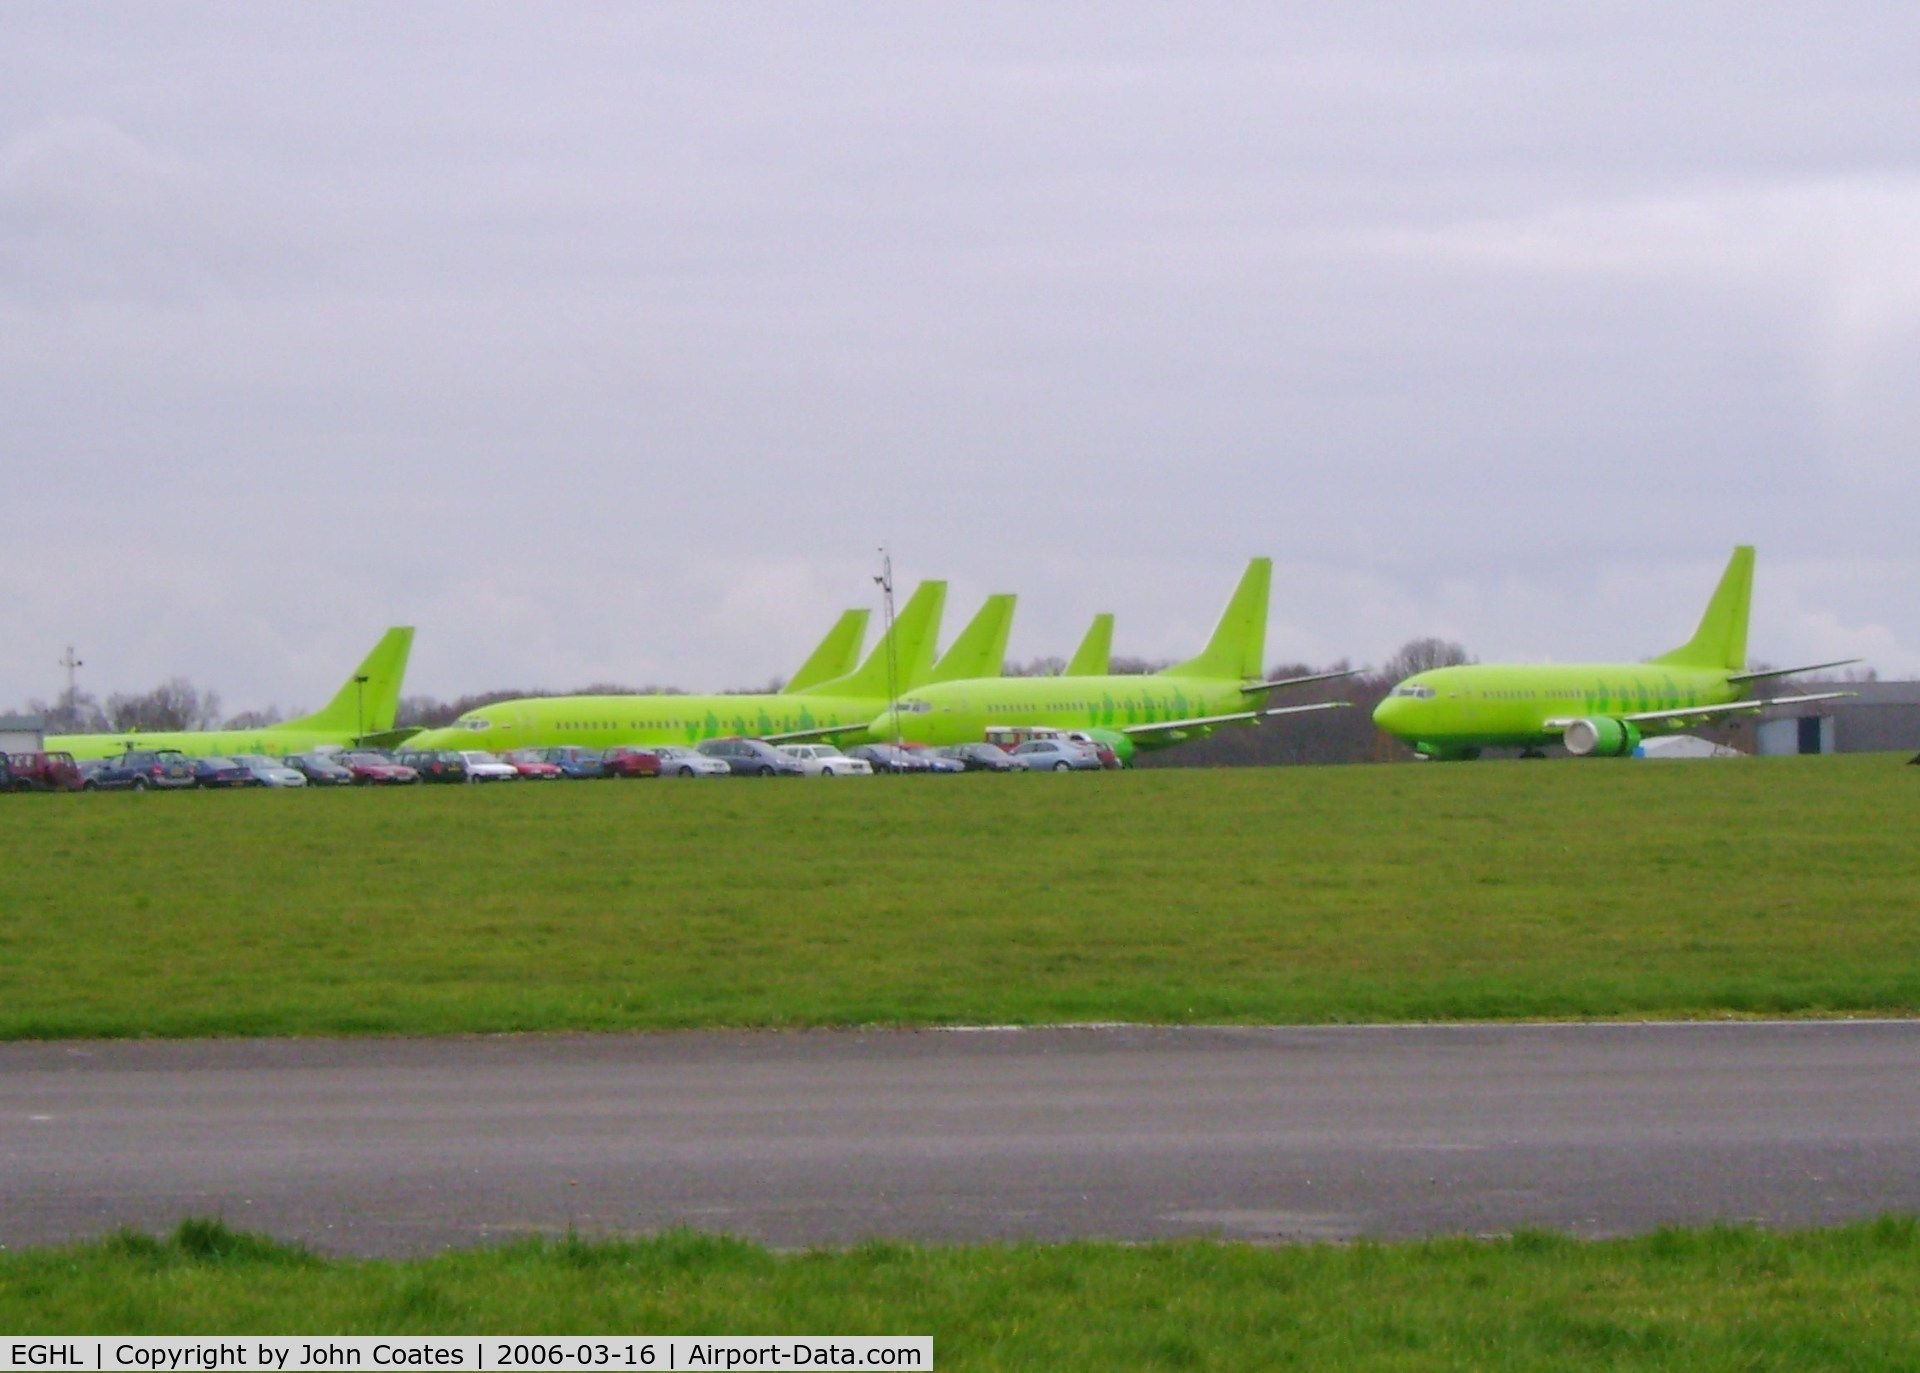 Lasham Airfield Airport, Basingstoke, England United Kingdom (EGHL) - 7 ex S7 737s in store at ATC